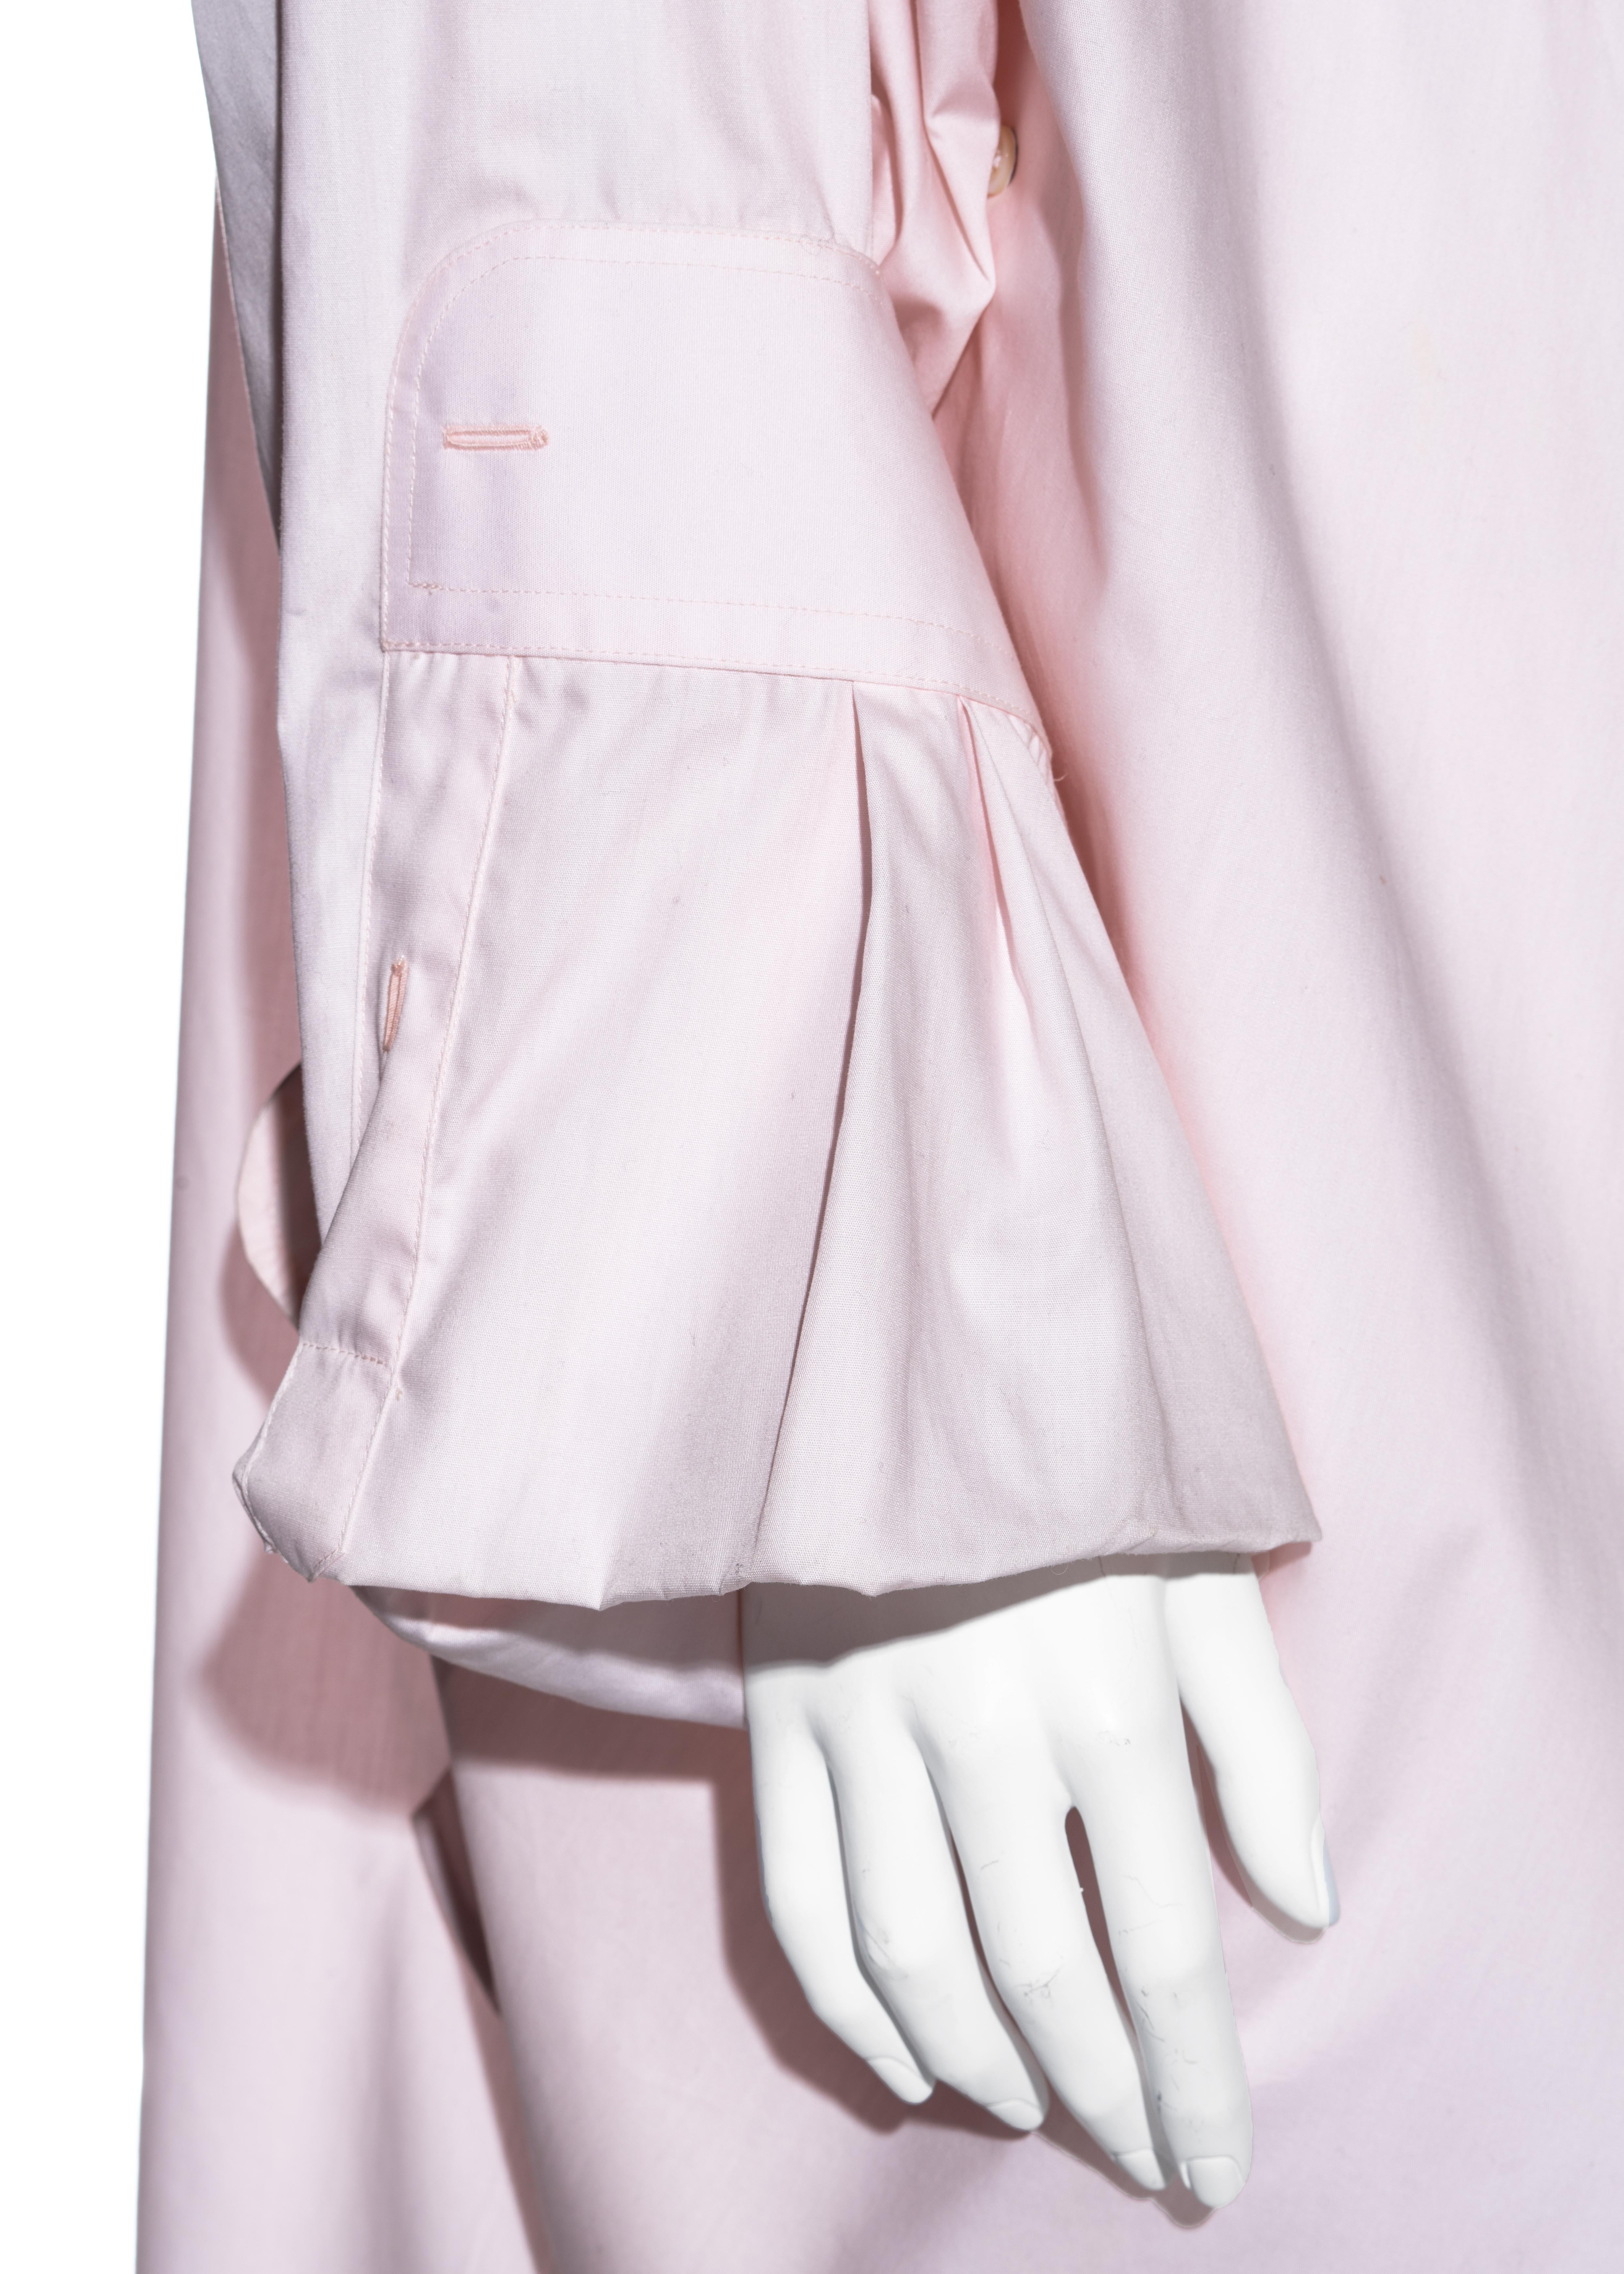 Margiela pink cotton oversized deconstructed folded shirt, ss 2001 For Sale 4